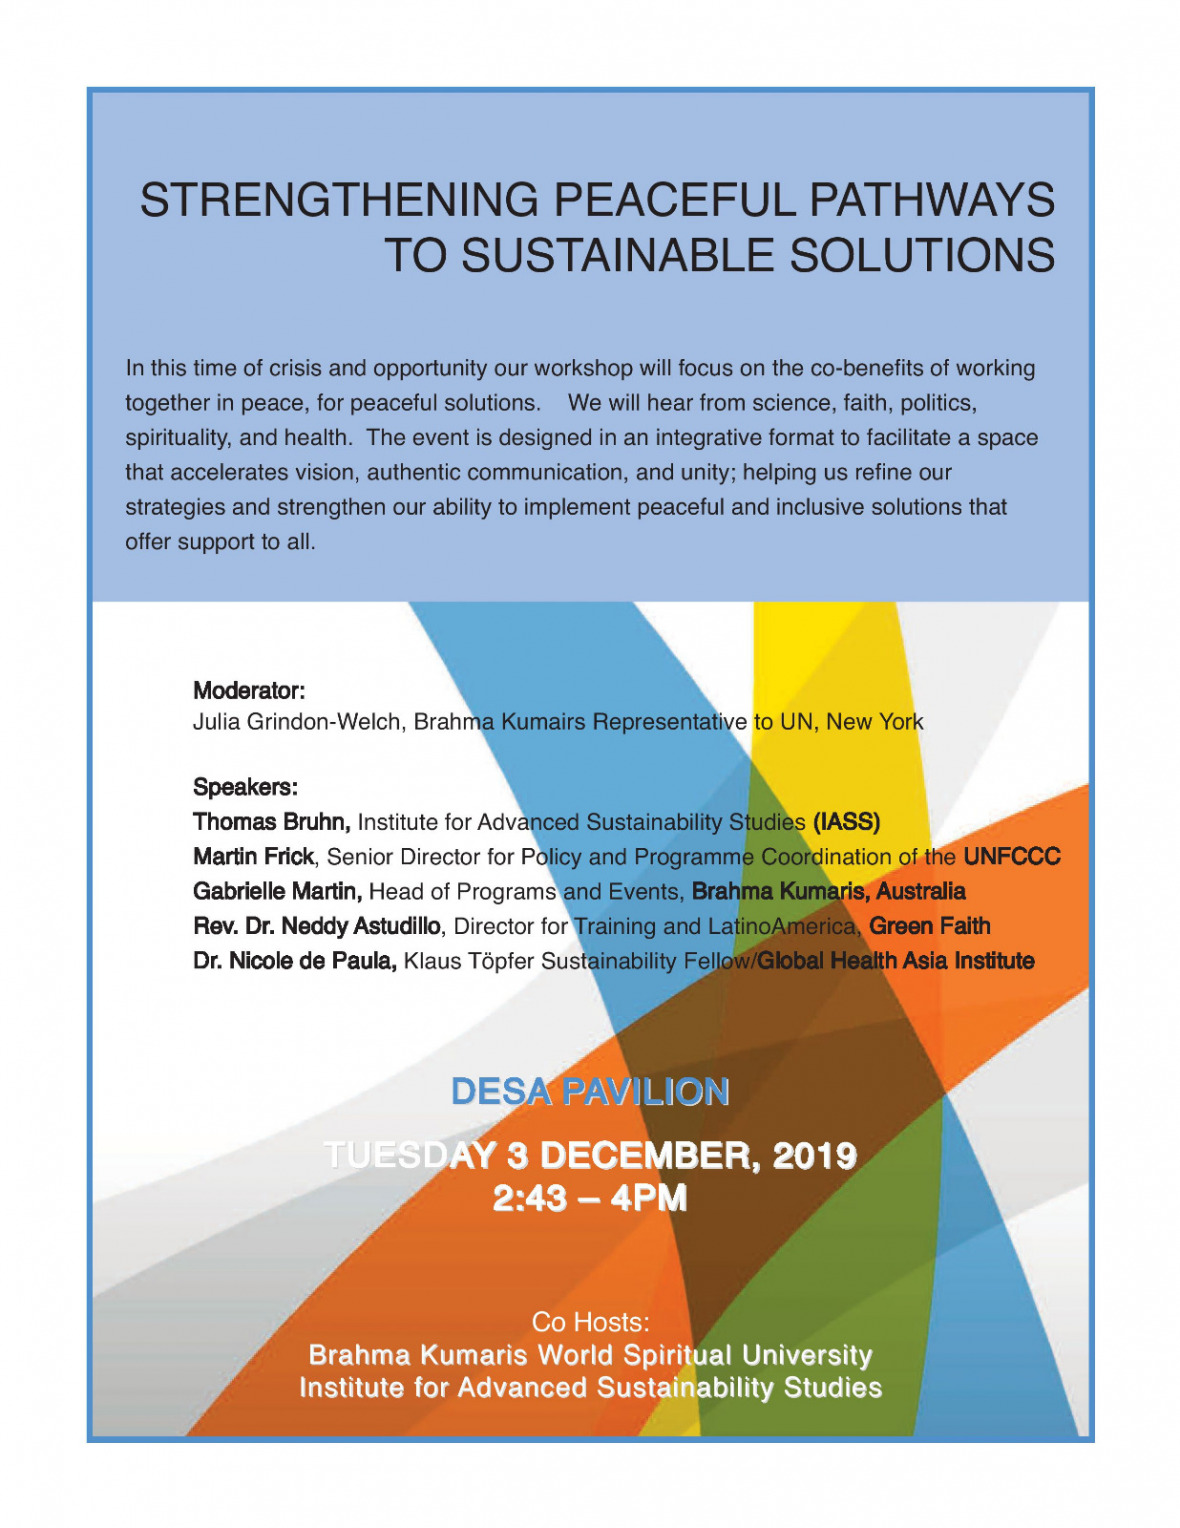 Strengthening peacefull pathways to sustainable solutions